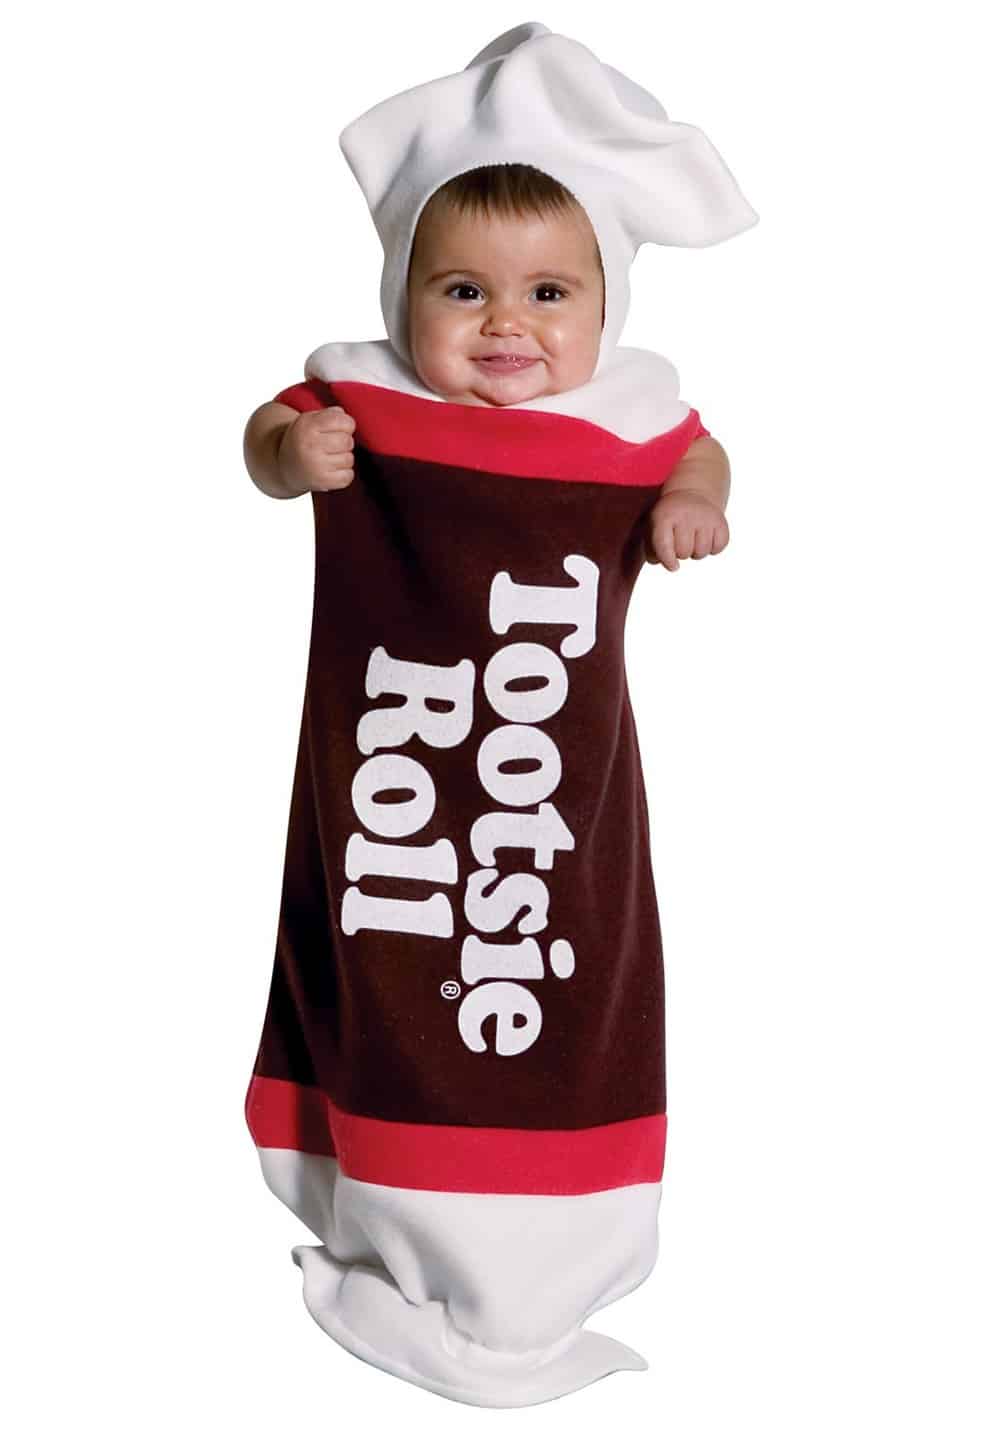 Product Image of the Tootsie Roll Baby Costume